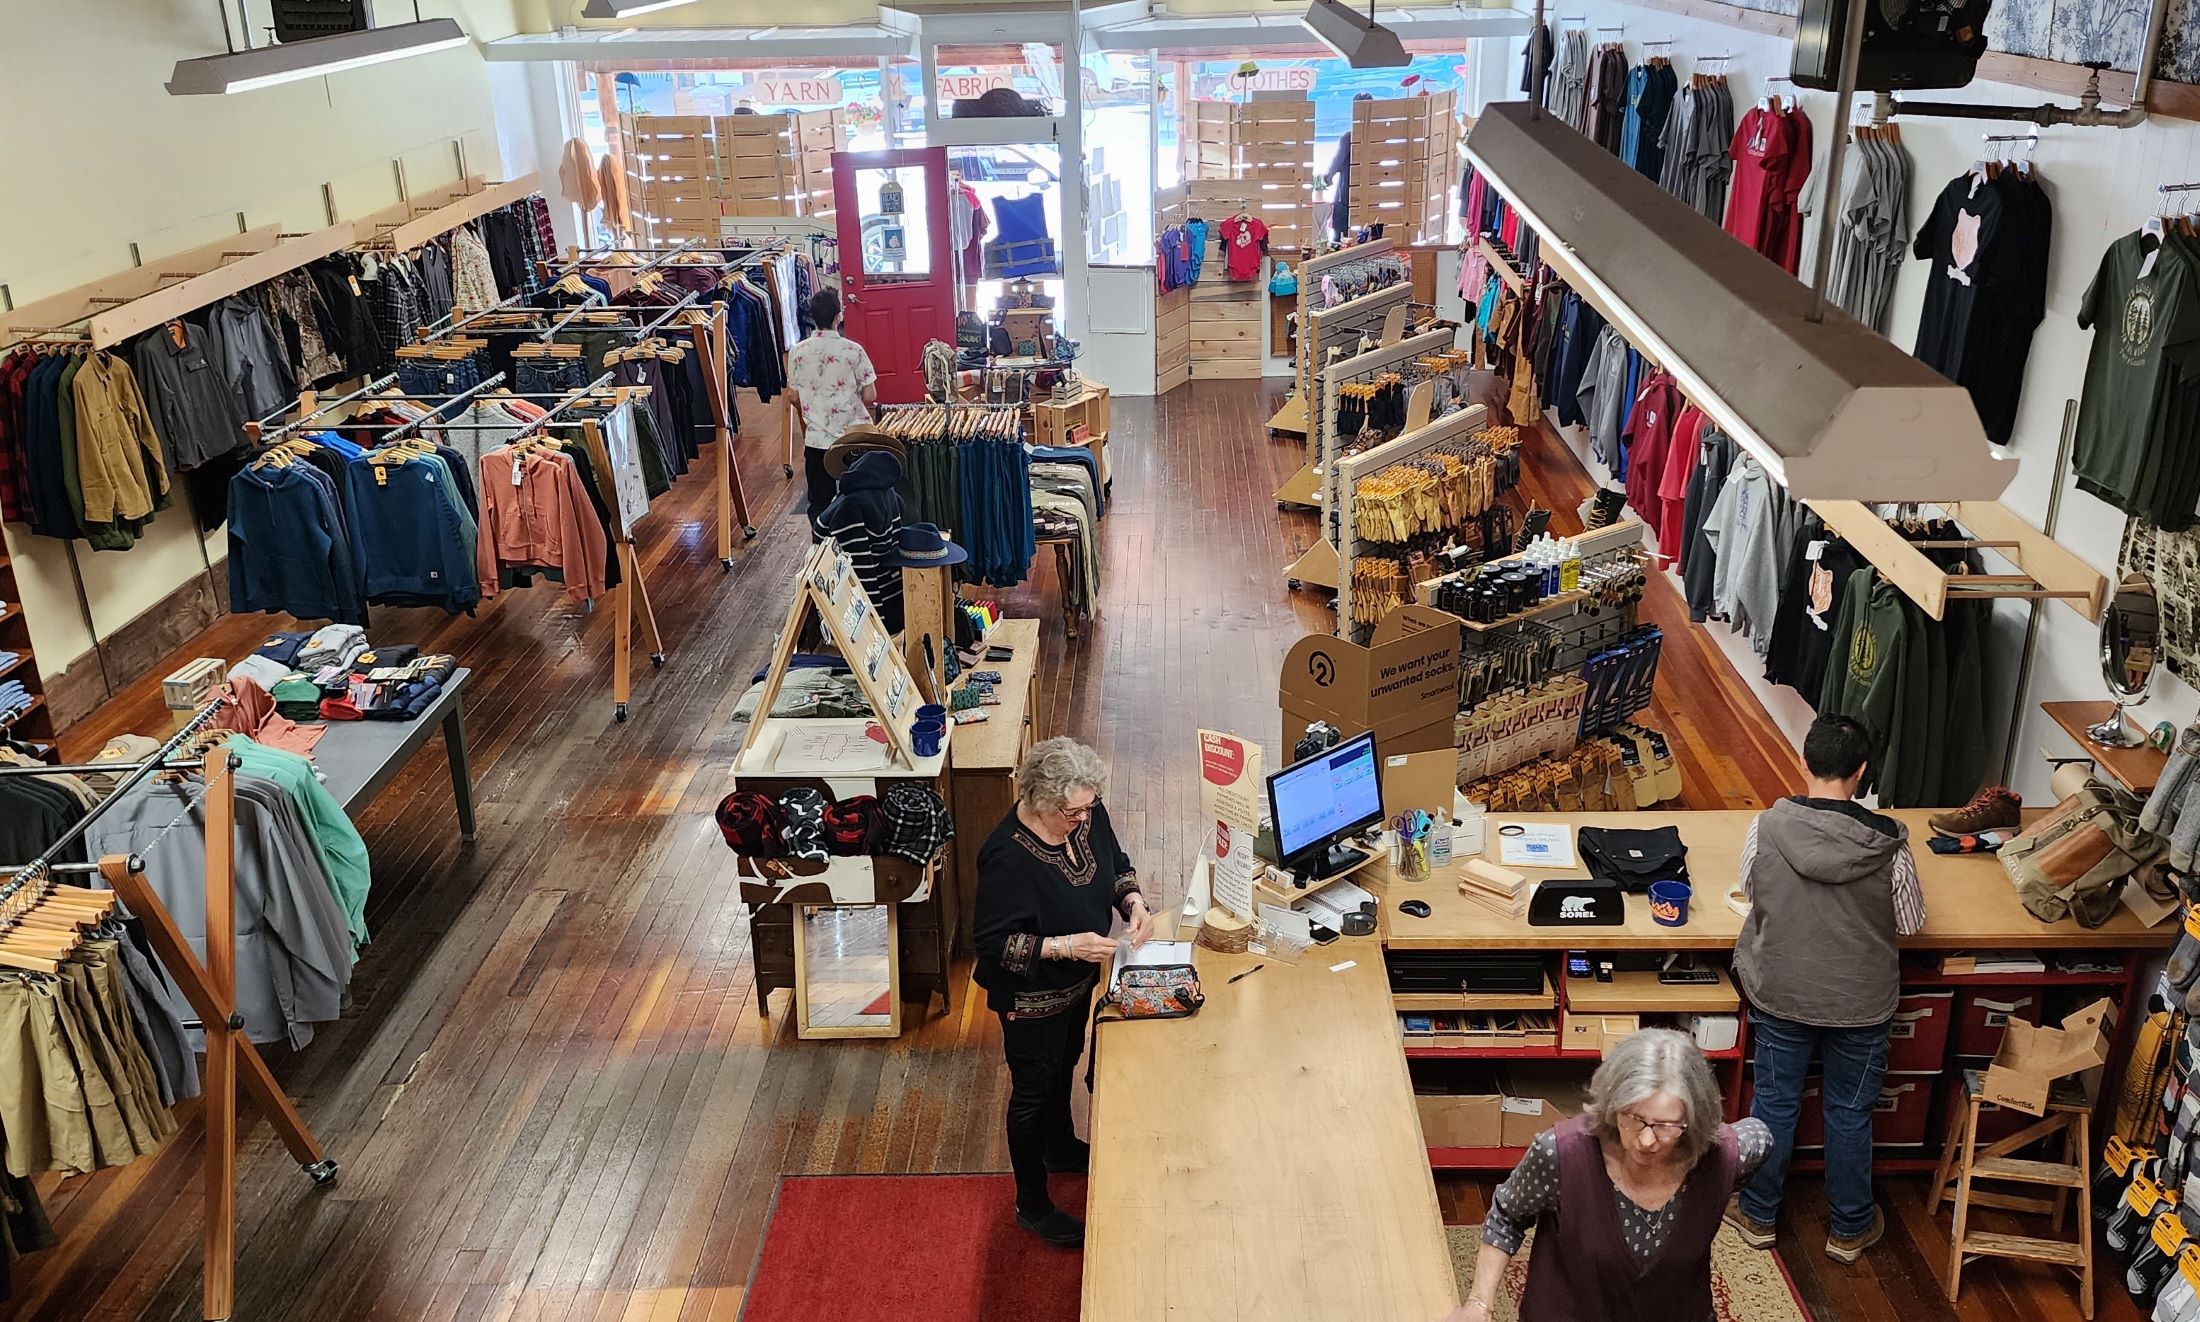 The Outfitters from inside the store